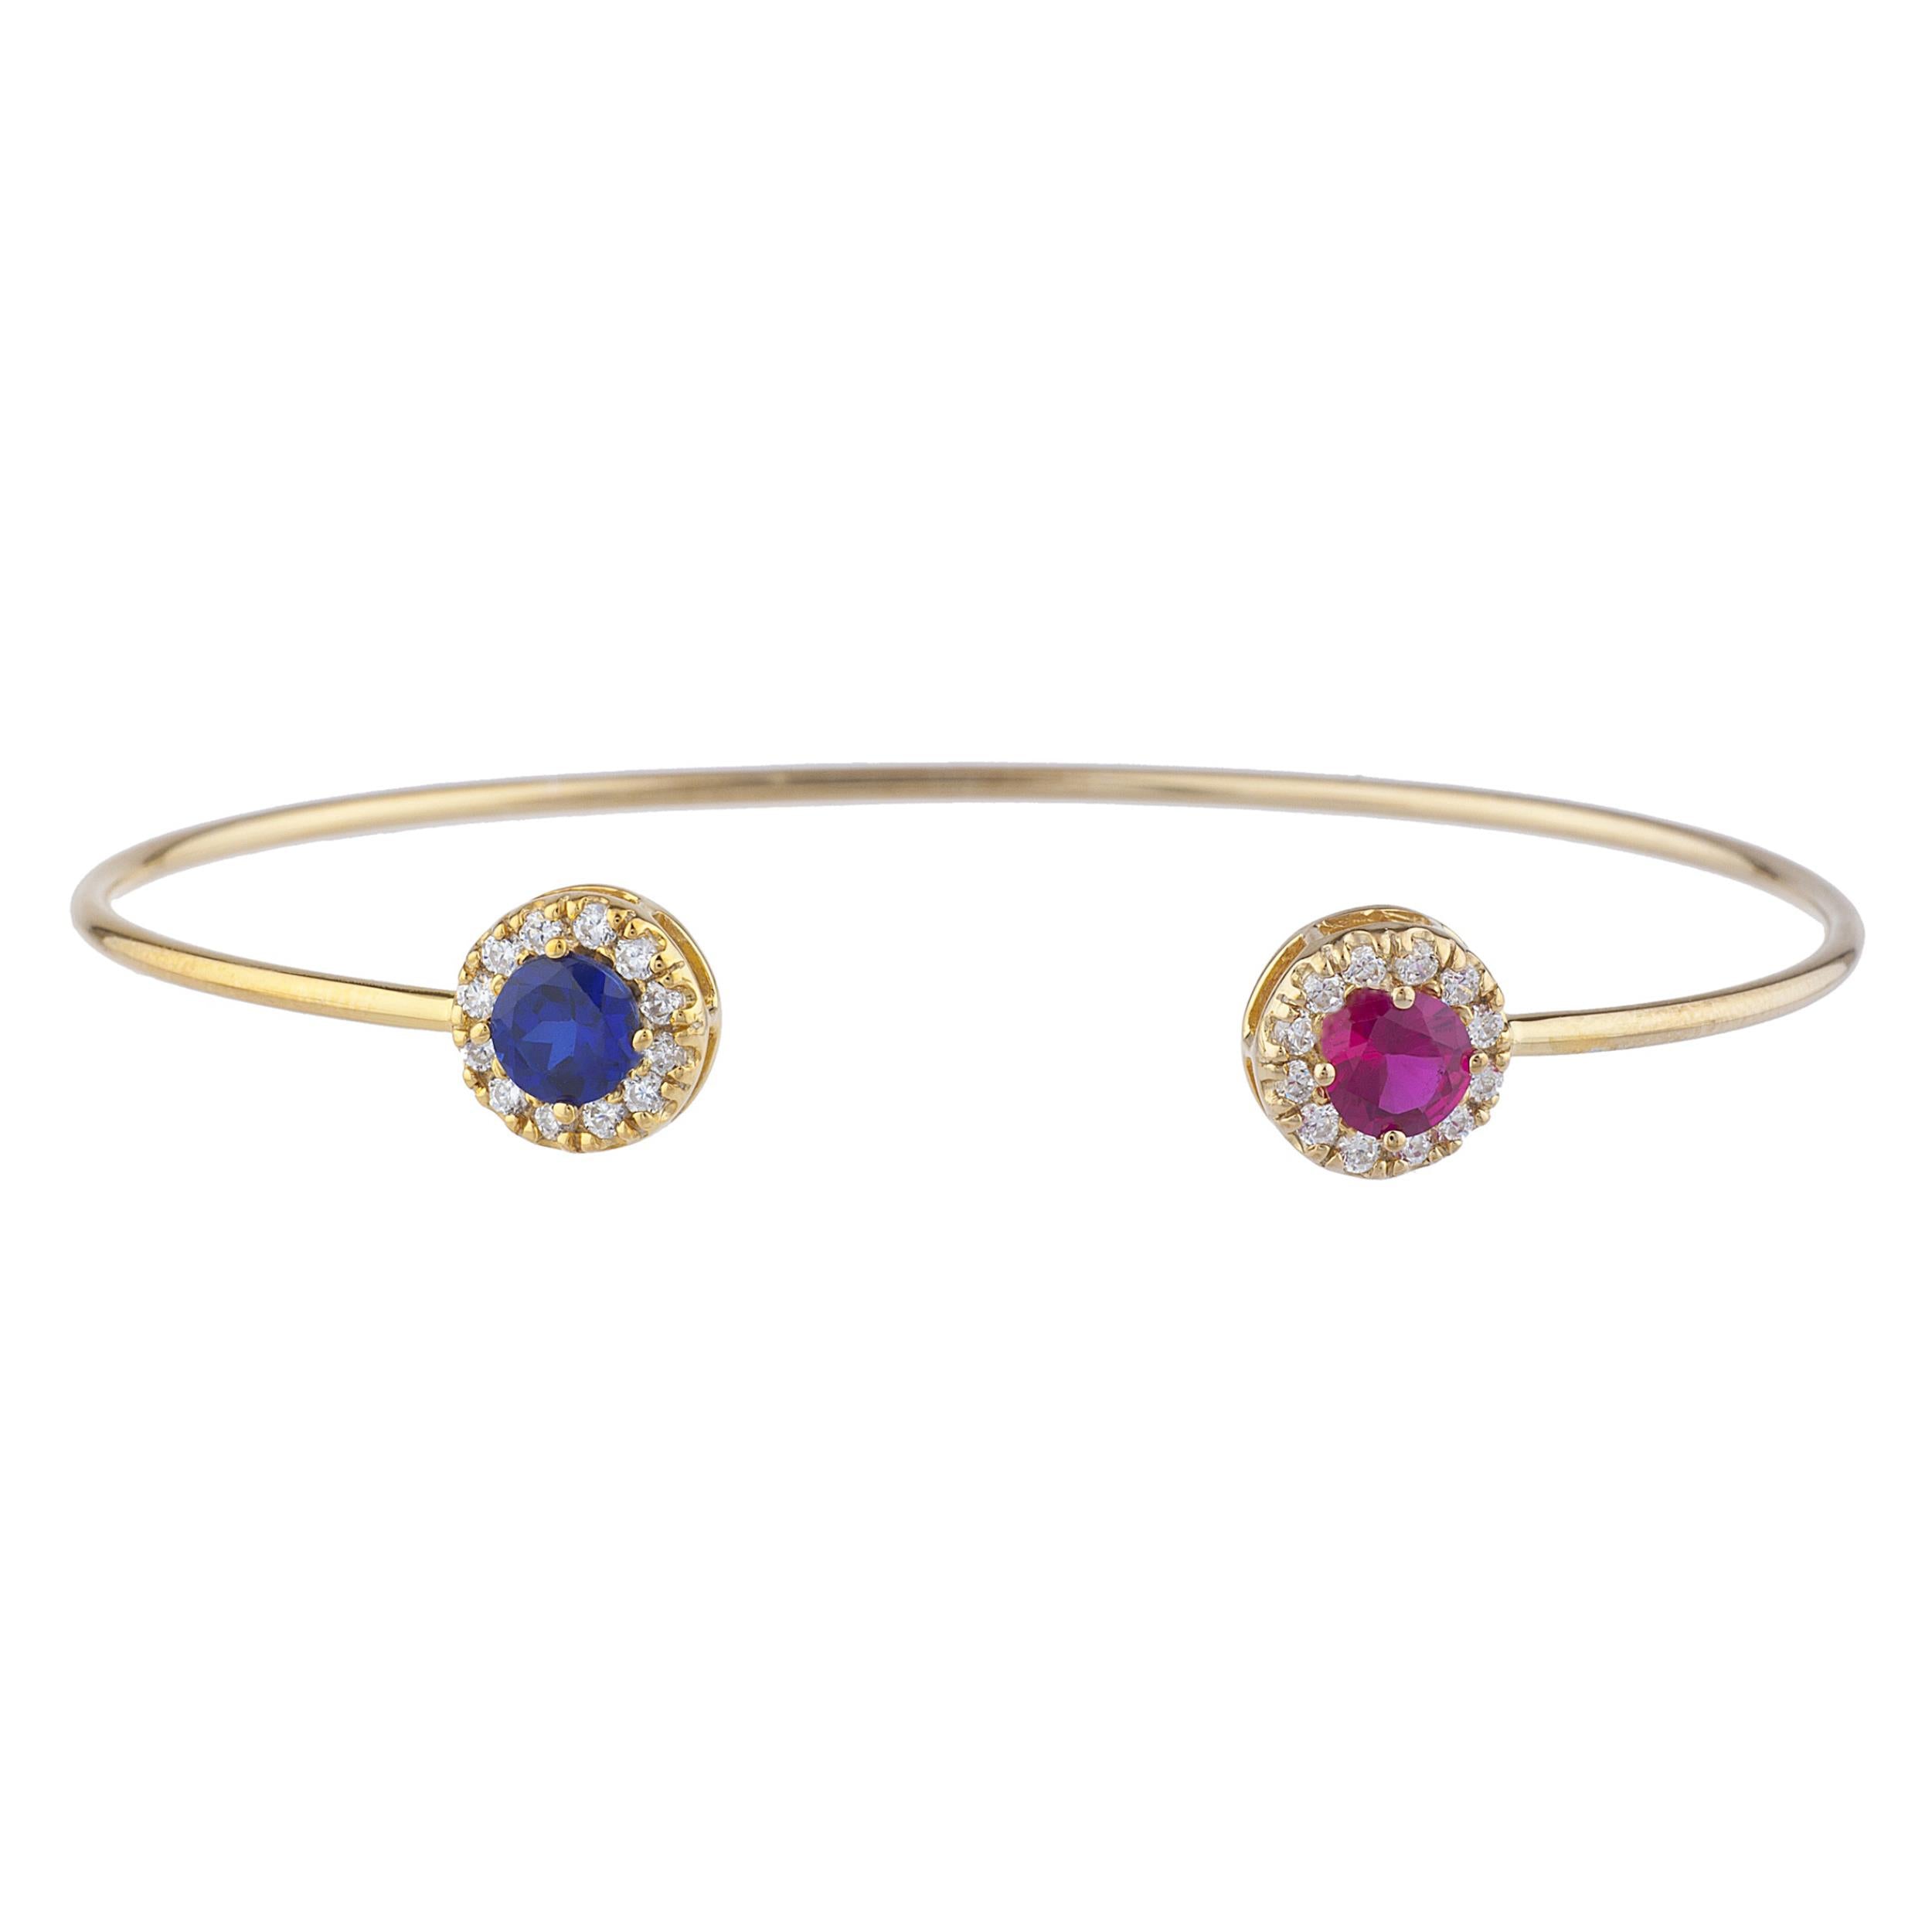 1 Ct Blue Sapphire & Ruby Halo Design Round Bangle Bracelet 14Kt Yellow Gold Rose Gold Silver